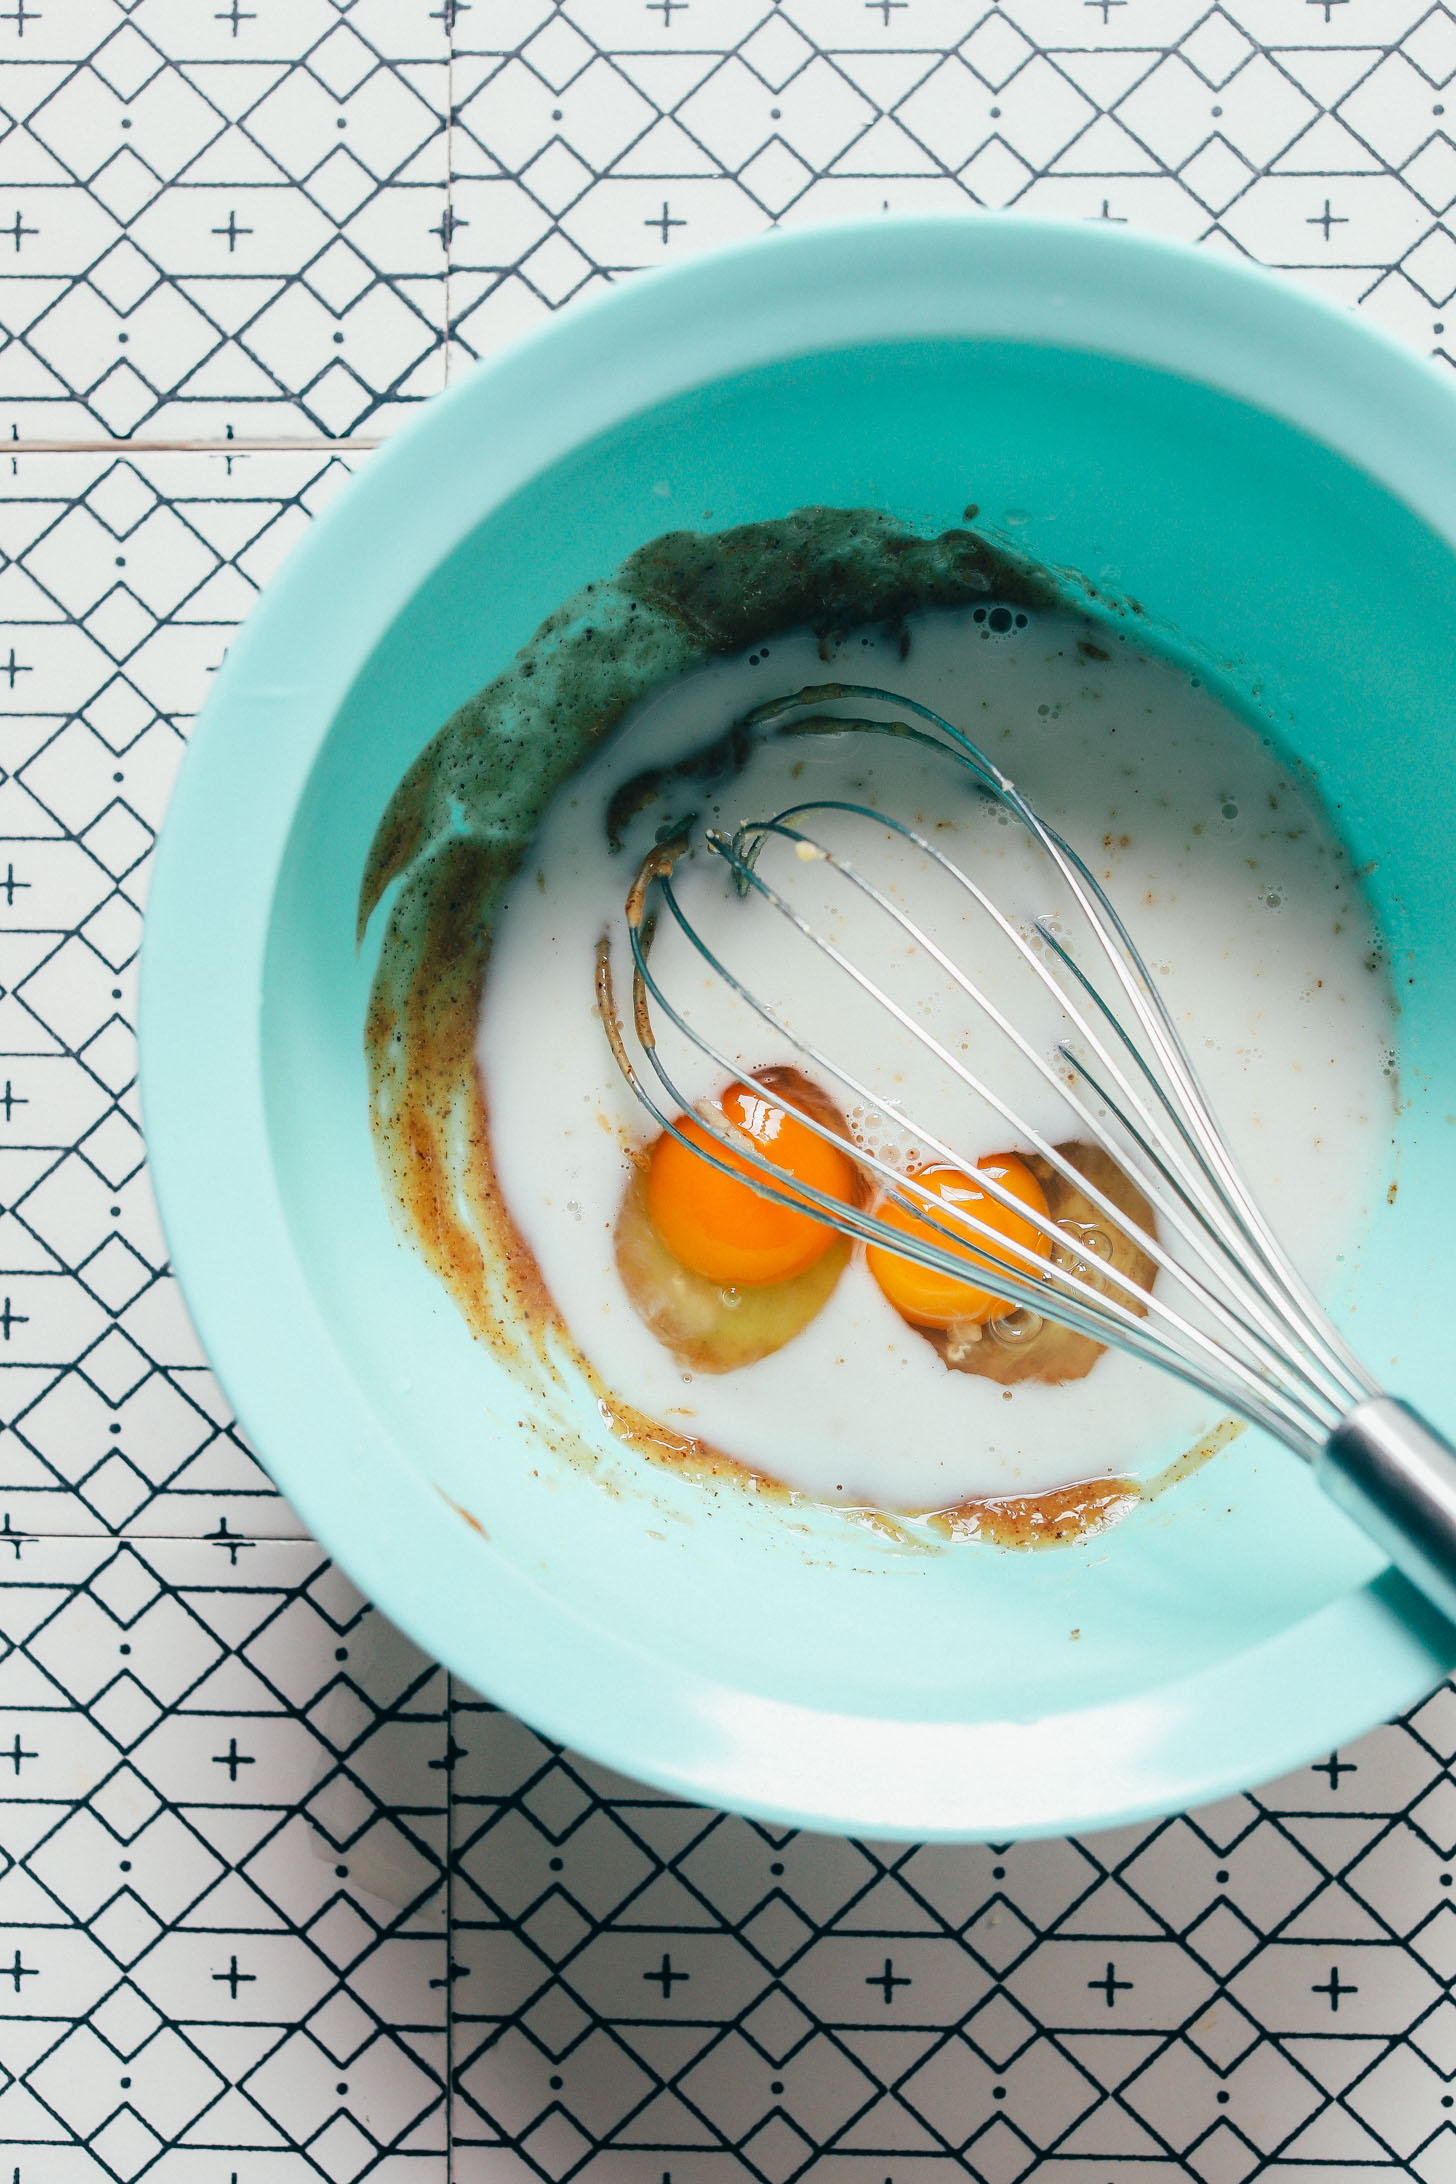 Using a whisk to mix delicious Grain-Free Pancake batter